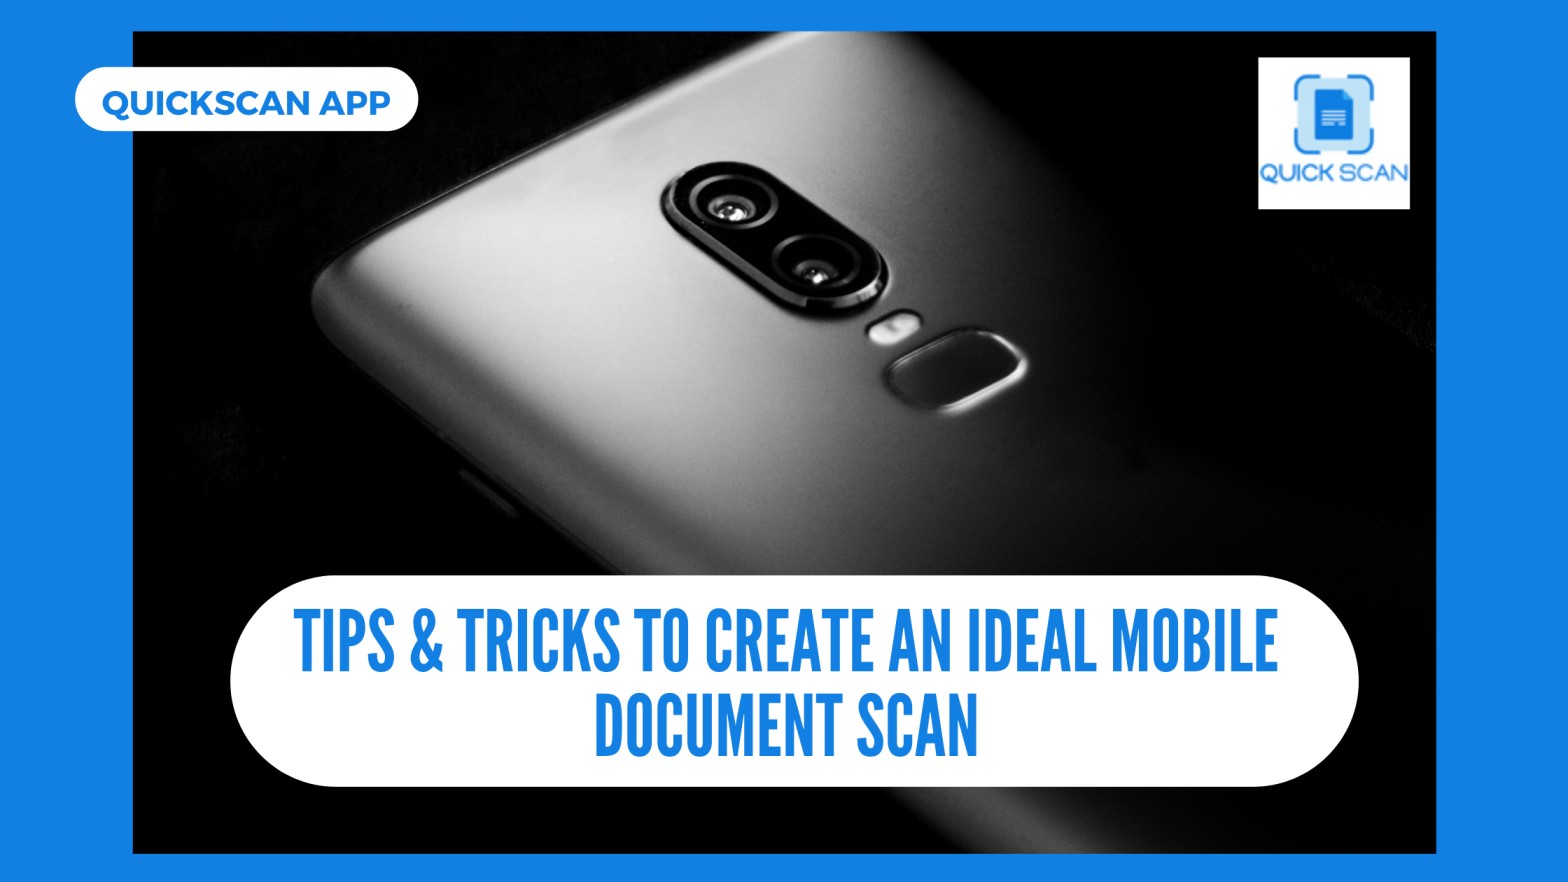 Tips & Tricks To Create An Ideal Mobile Document Scan